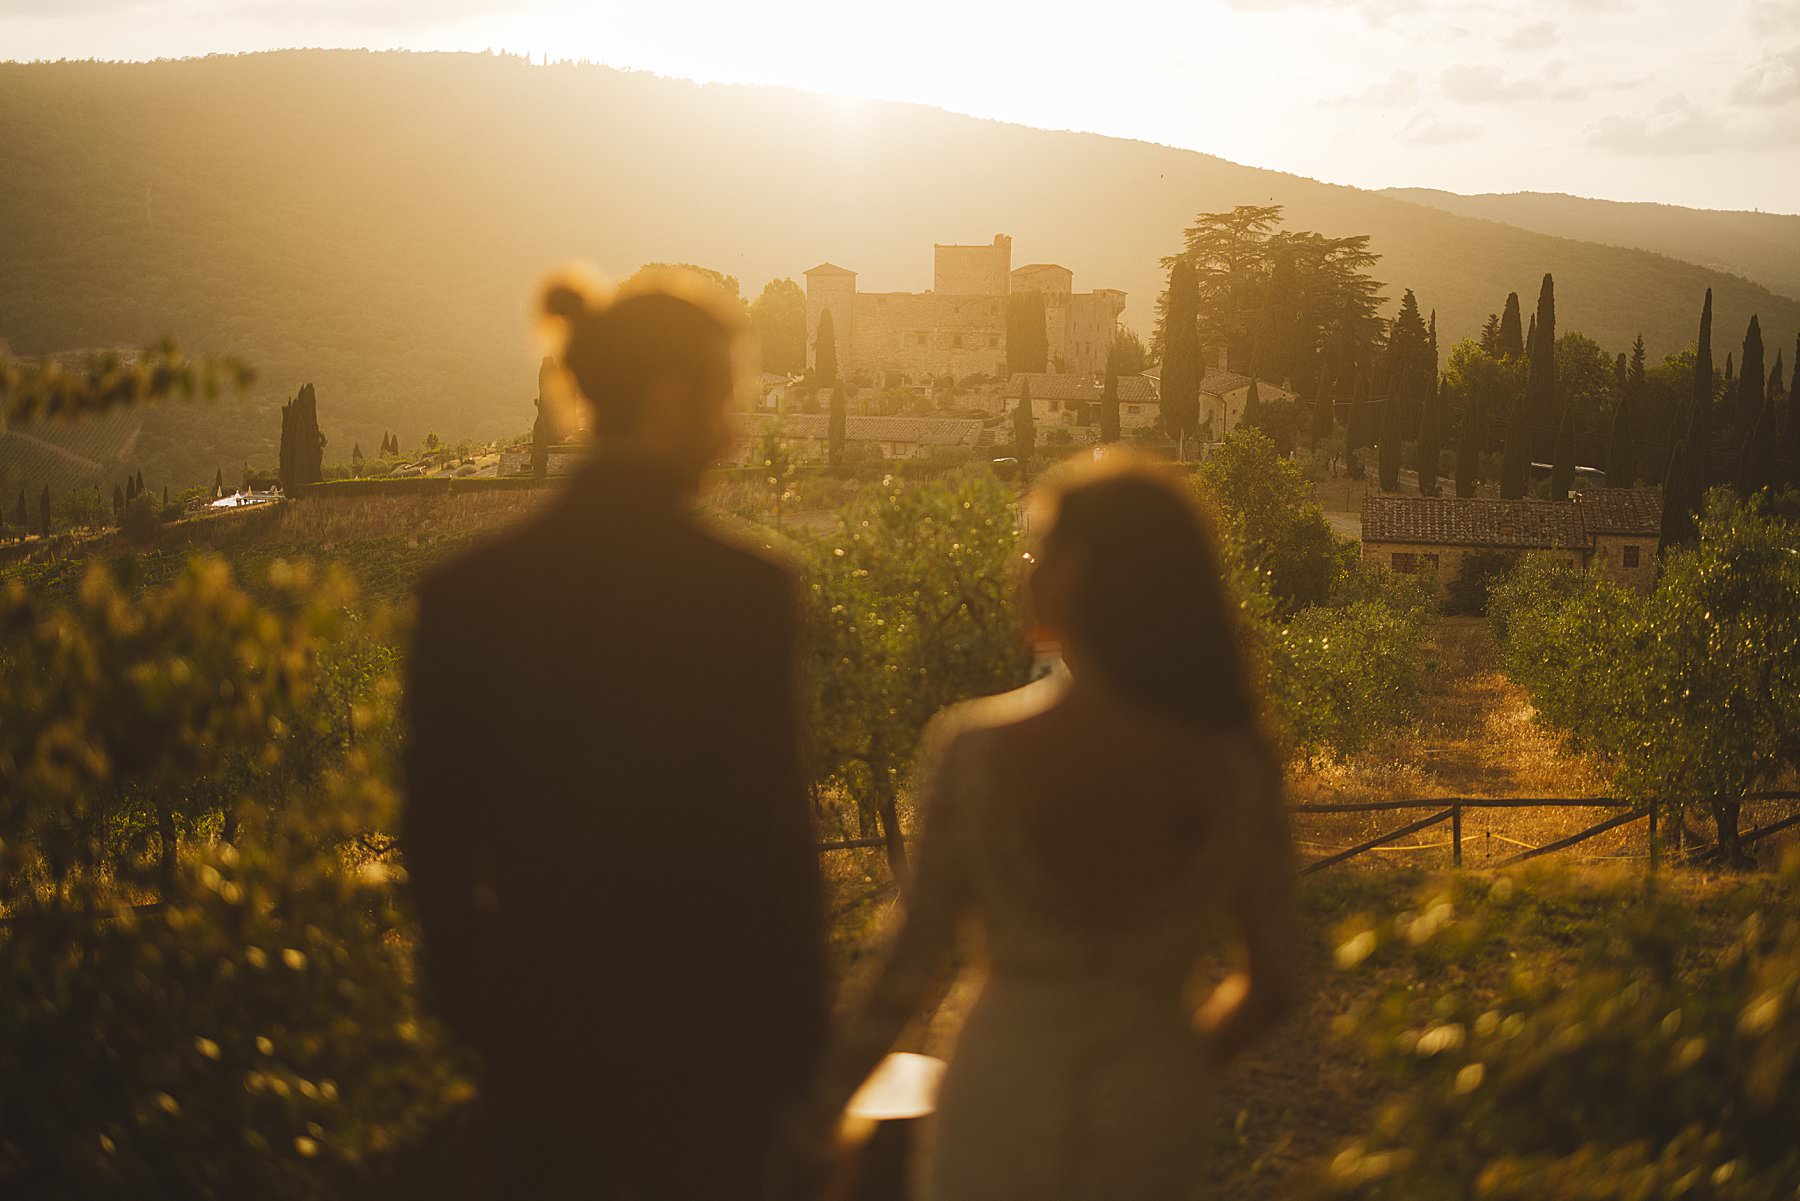 Elopement photos in a dreamy castle in the countryside of Tuscany